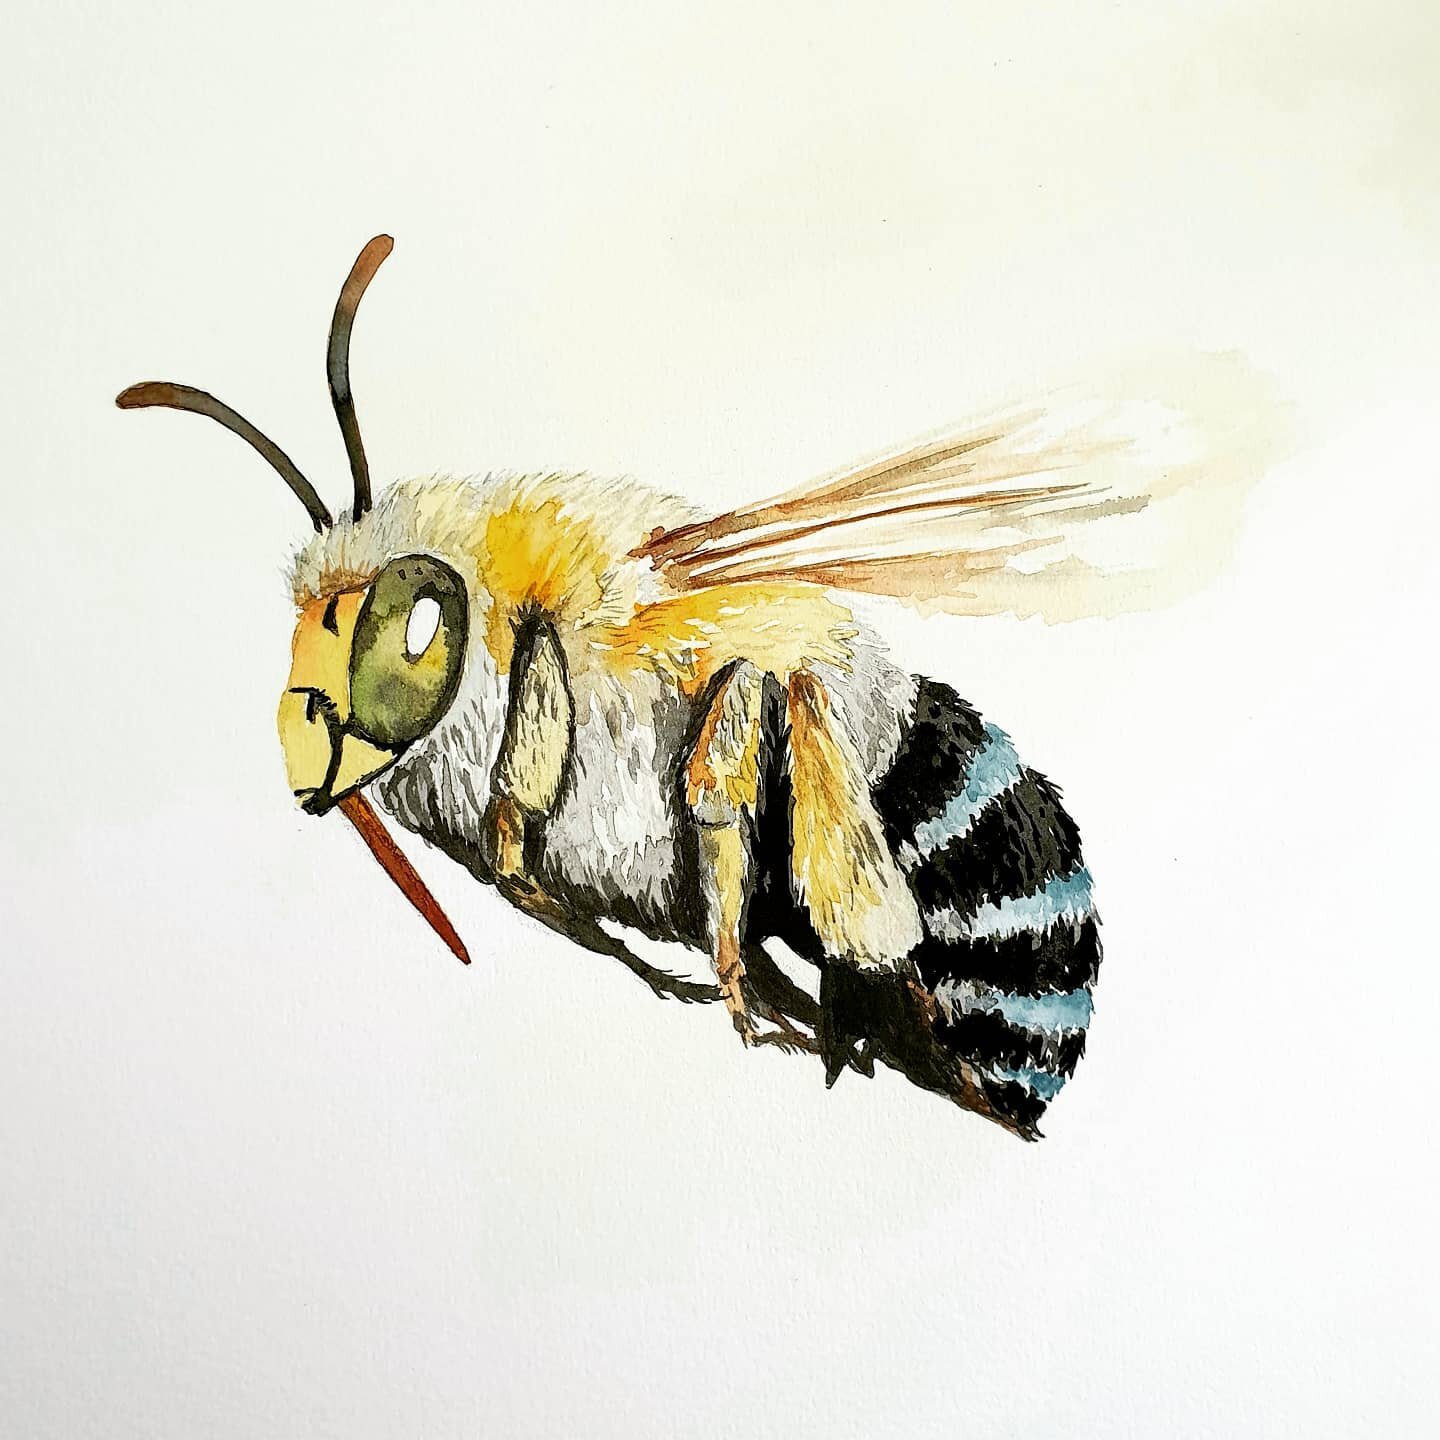 Abd lastly, a little watercolour depiction of a Blue Banded Bee. #tasteofrutherglen